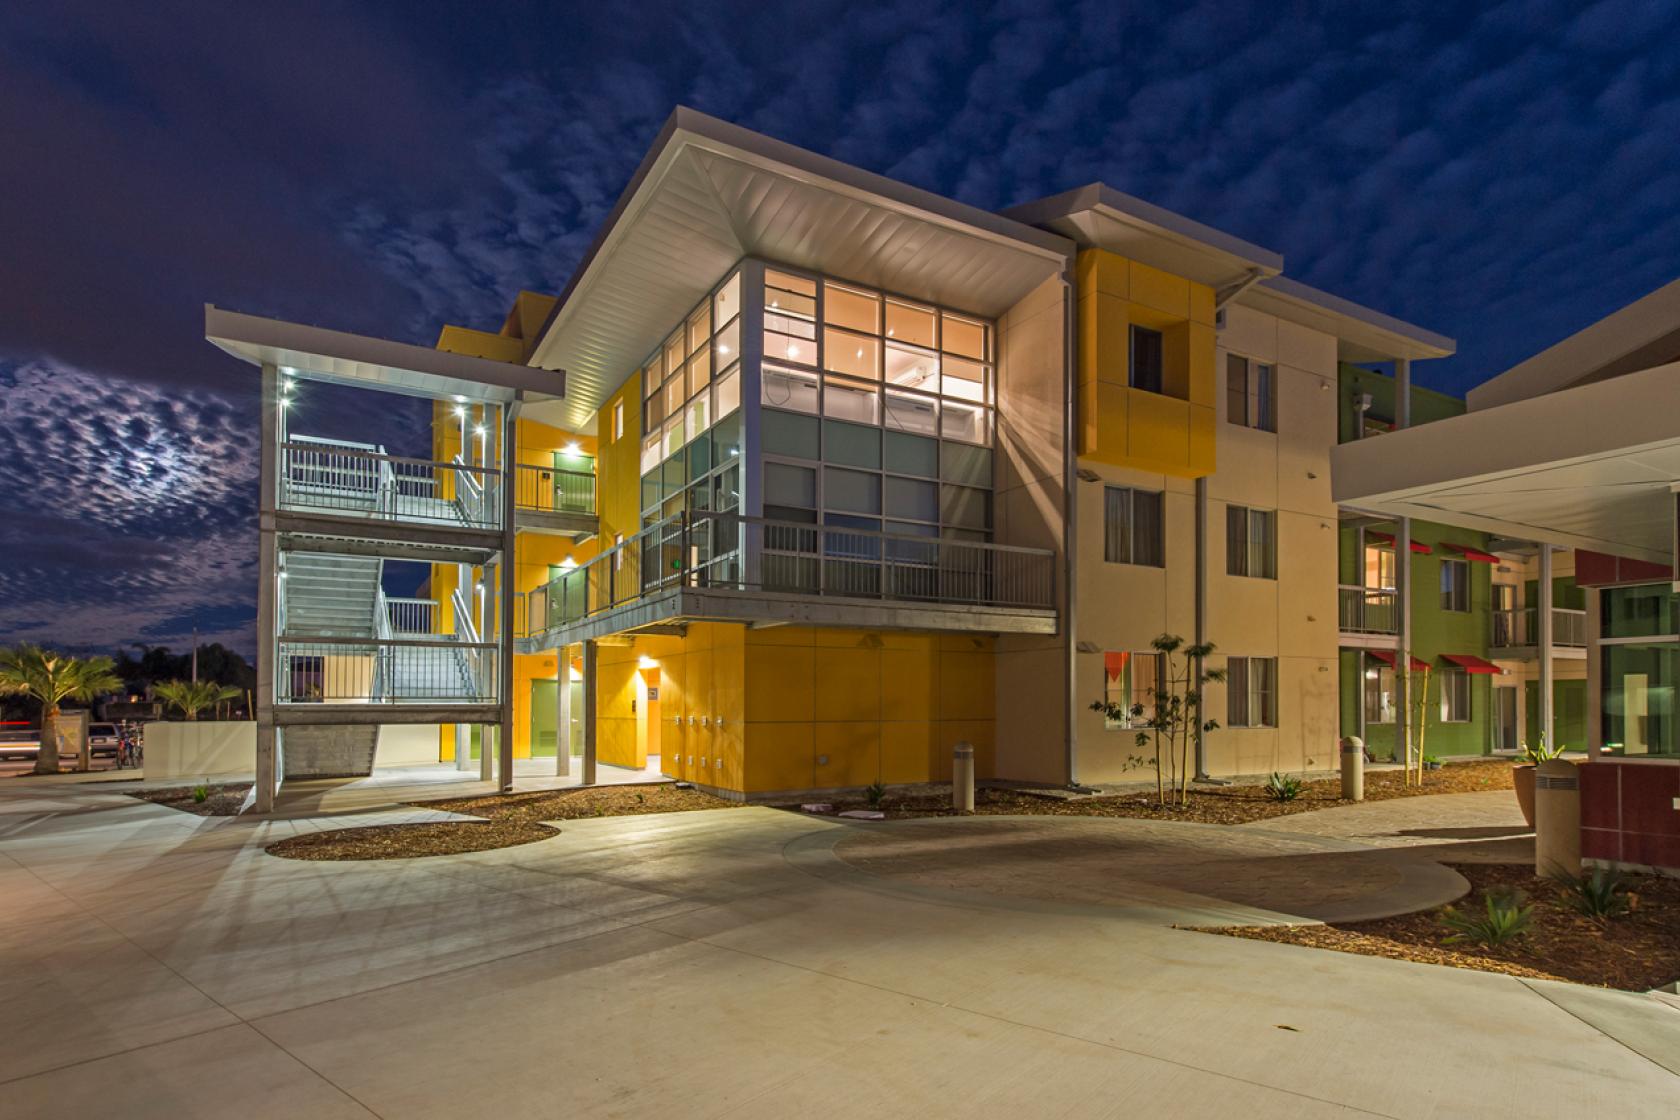 exterior of Sierra Madre Villages at night